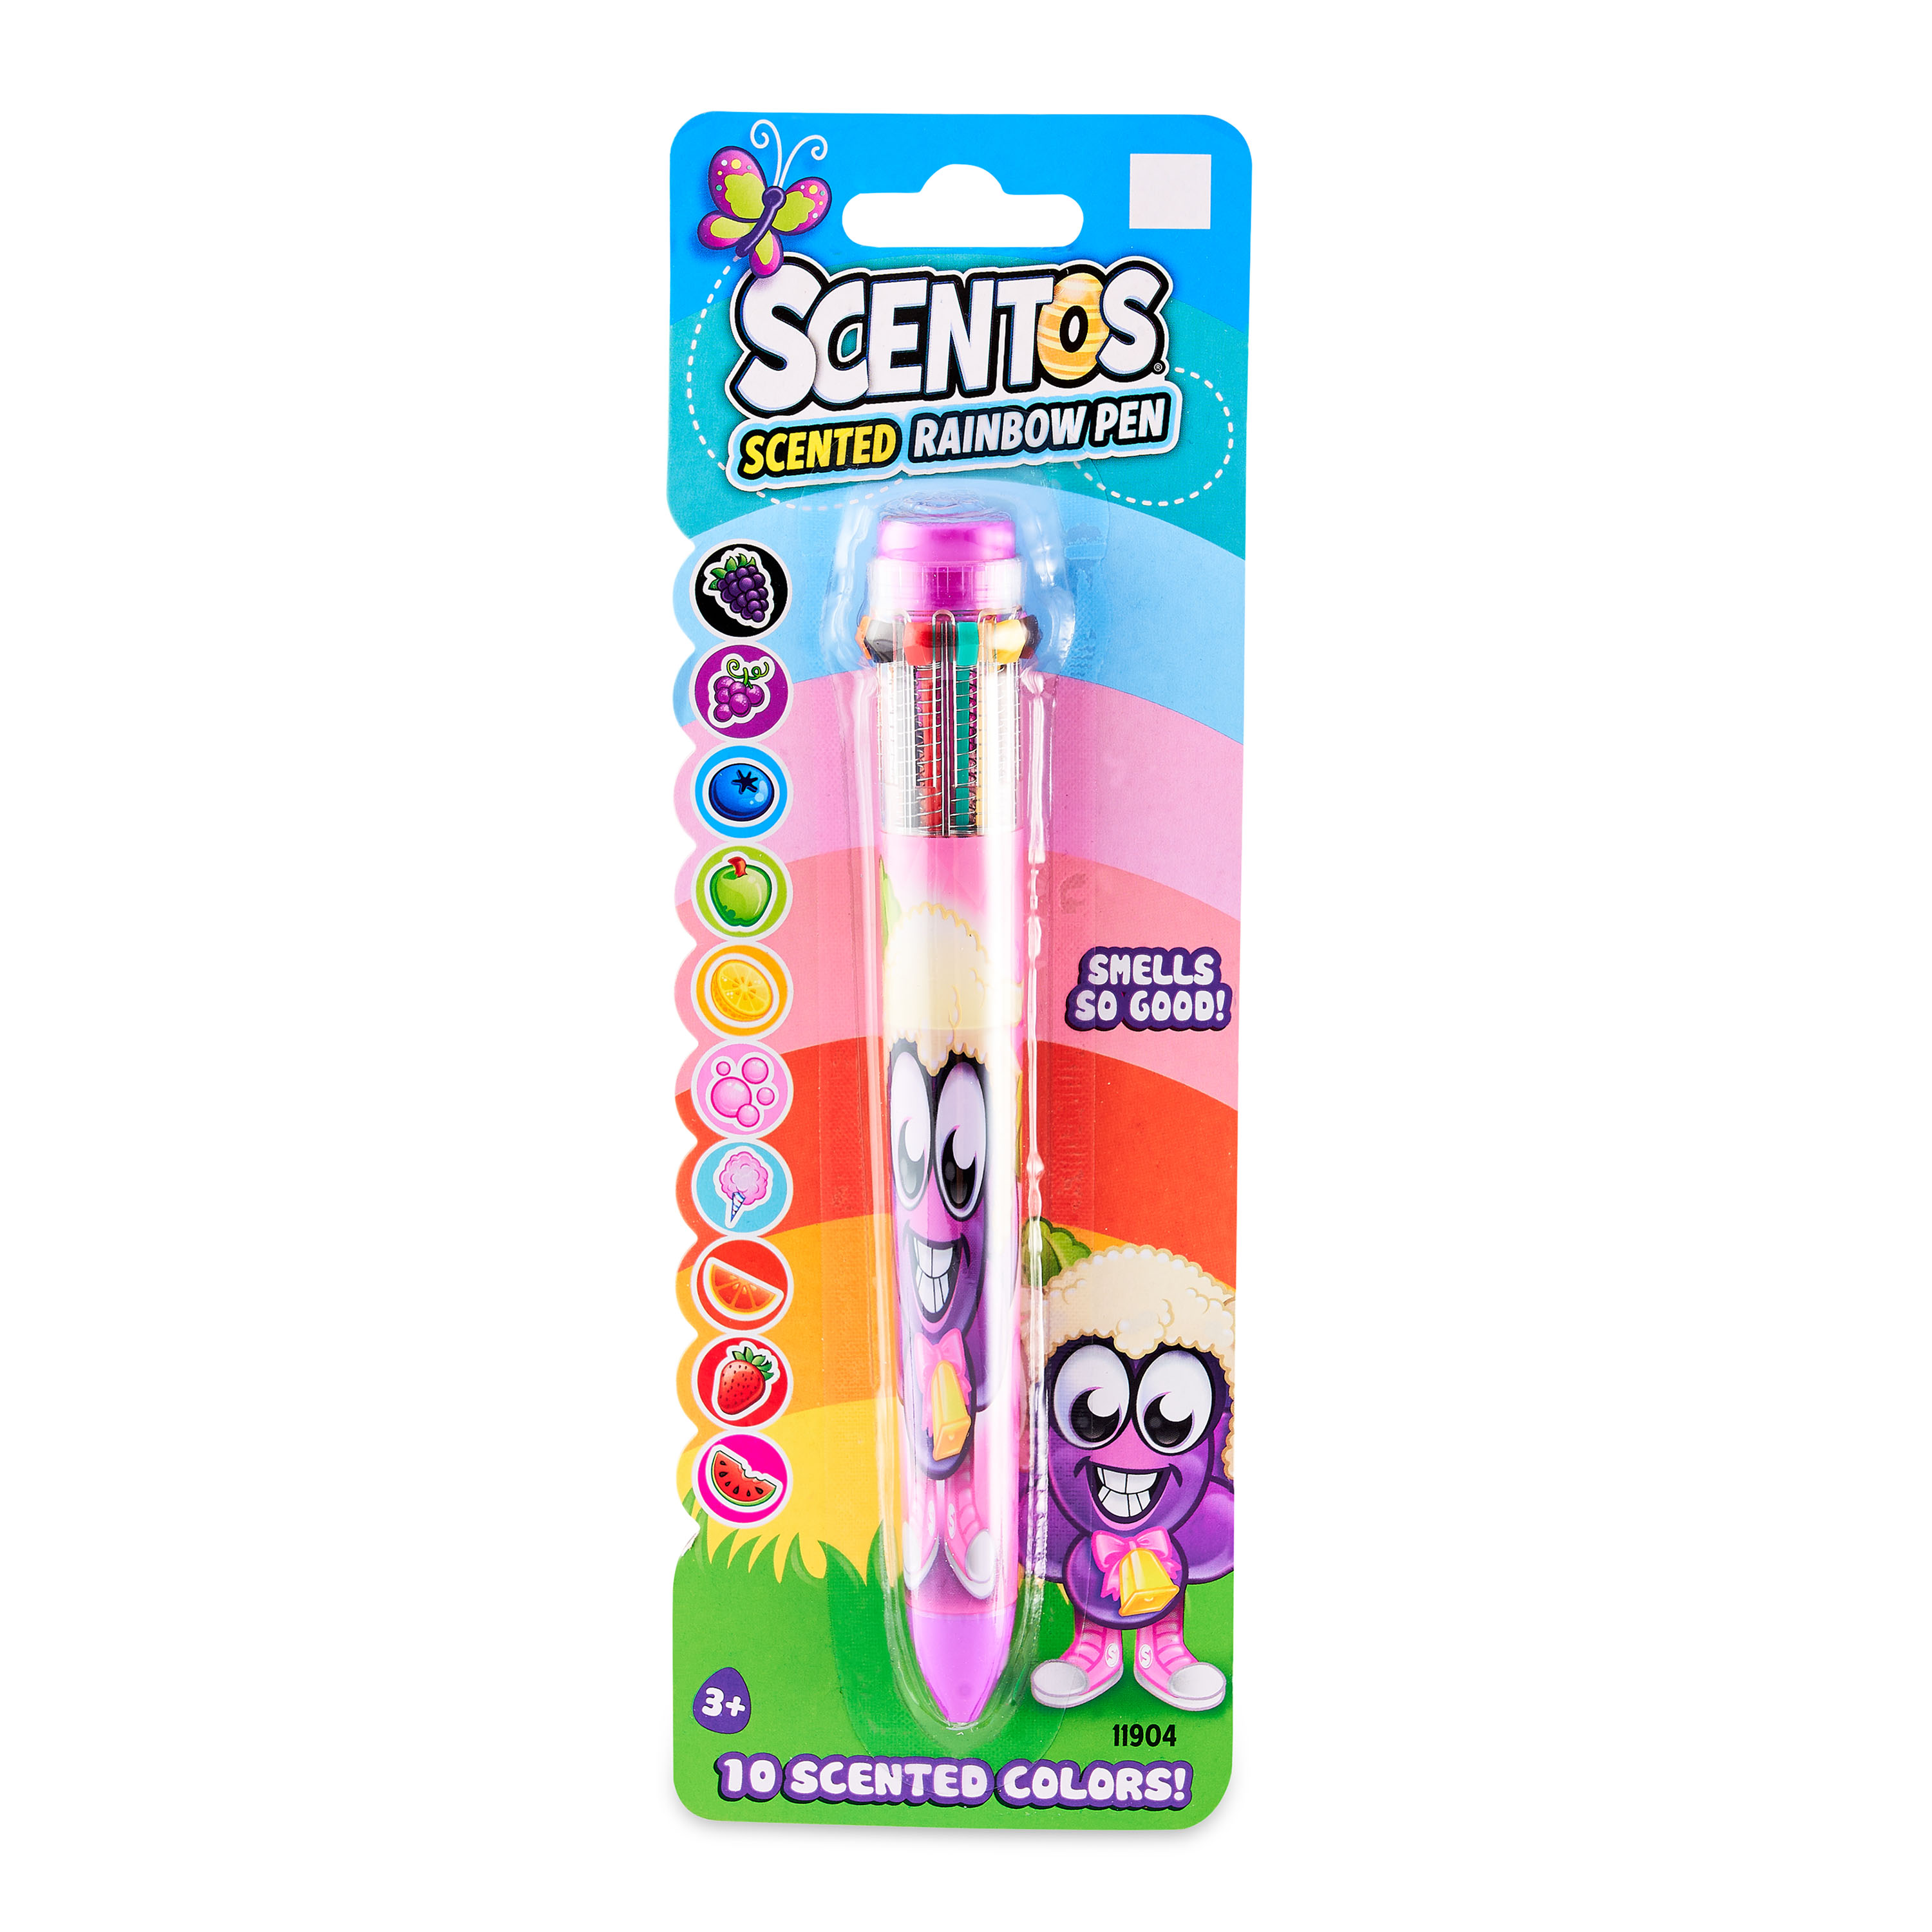 Scentos Easter Themed Scented Ballpoint Purple Rainbow Pen with 10 Colors - Ages 3+, Stationary & Stationary Sets - image 2 of 5